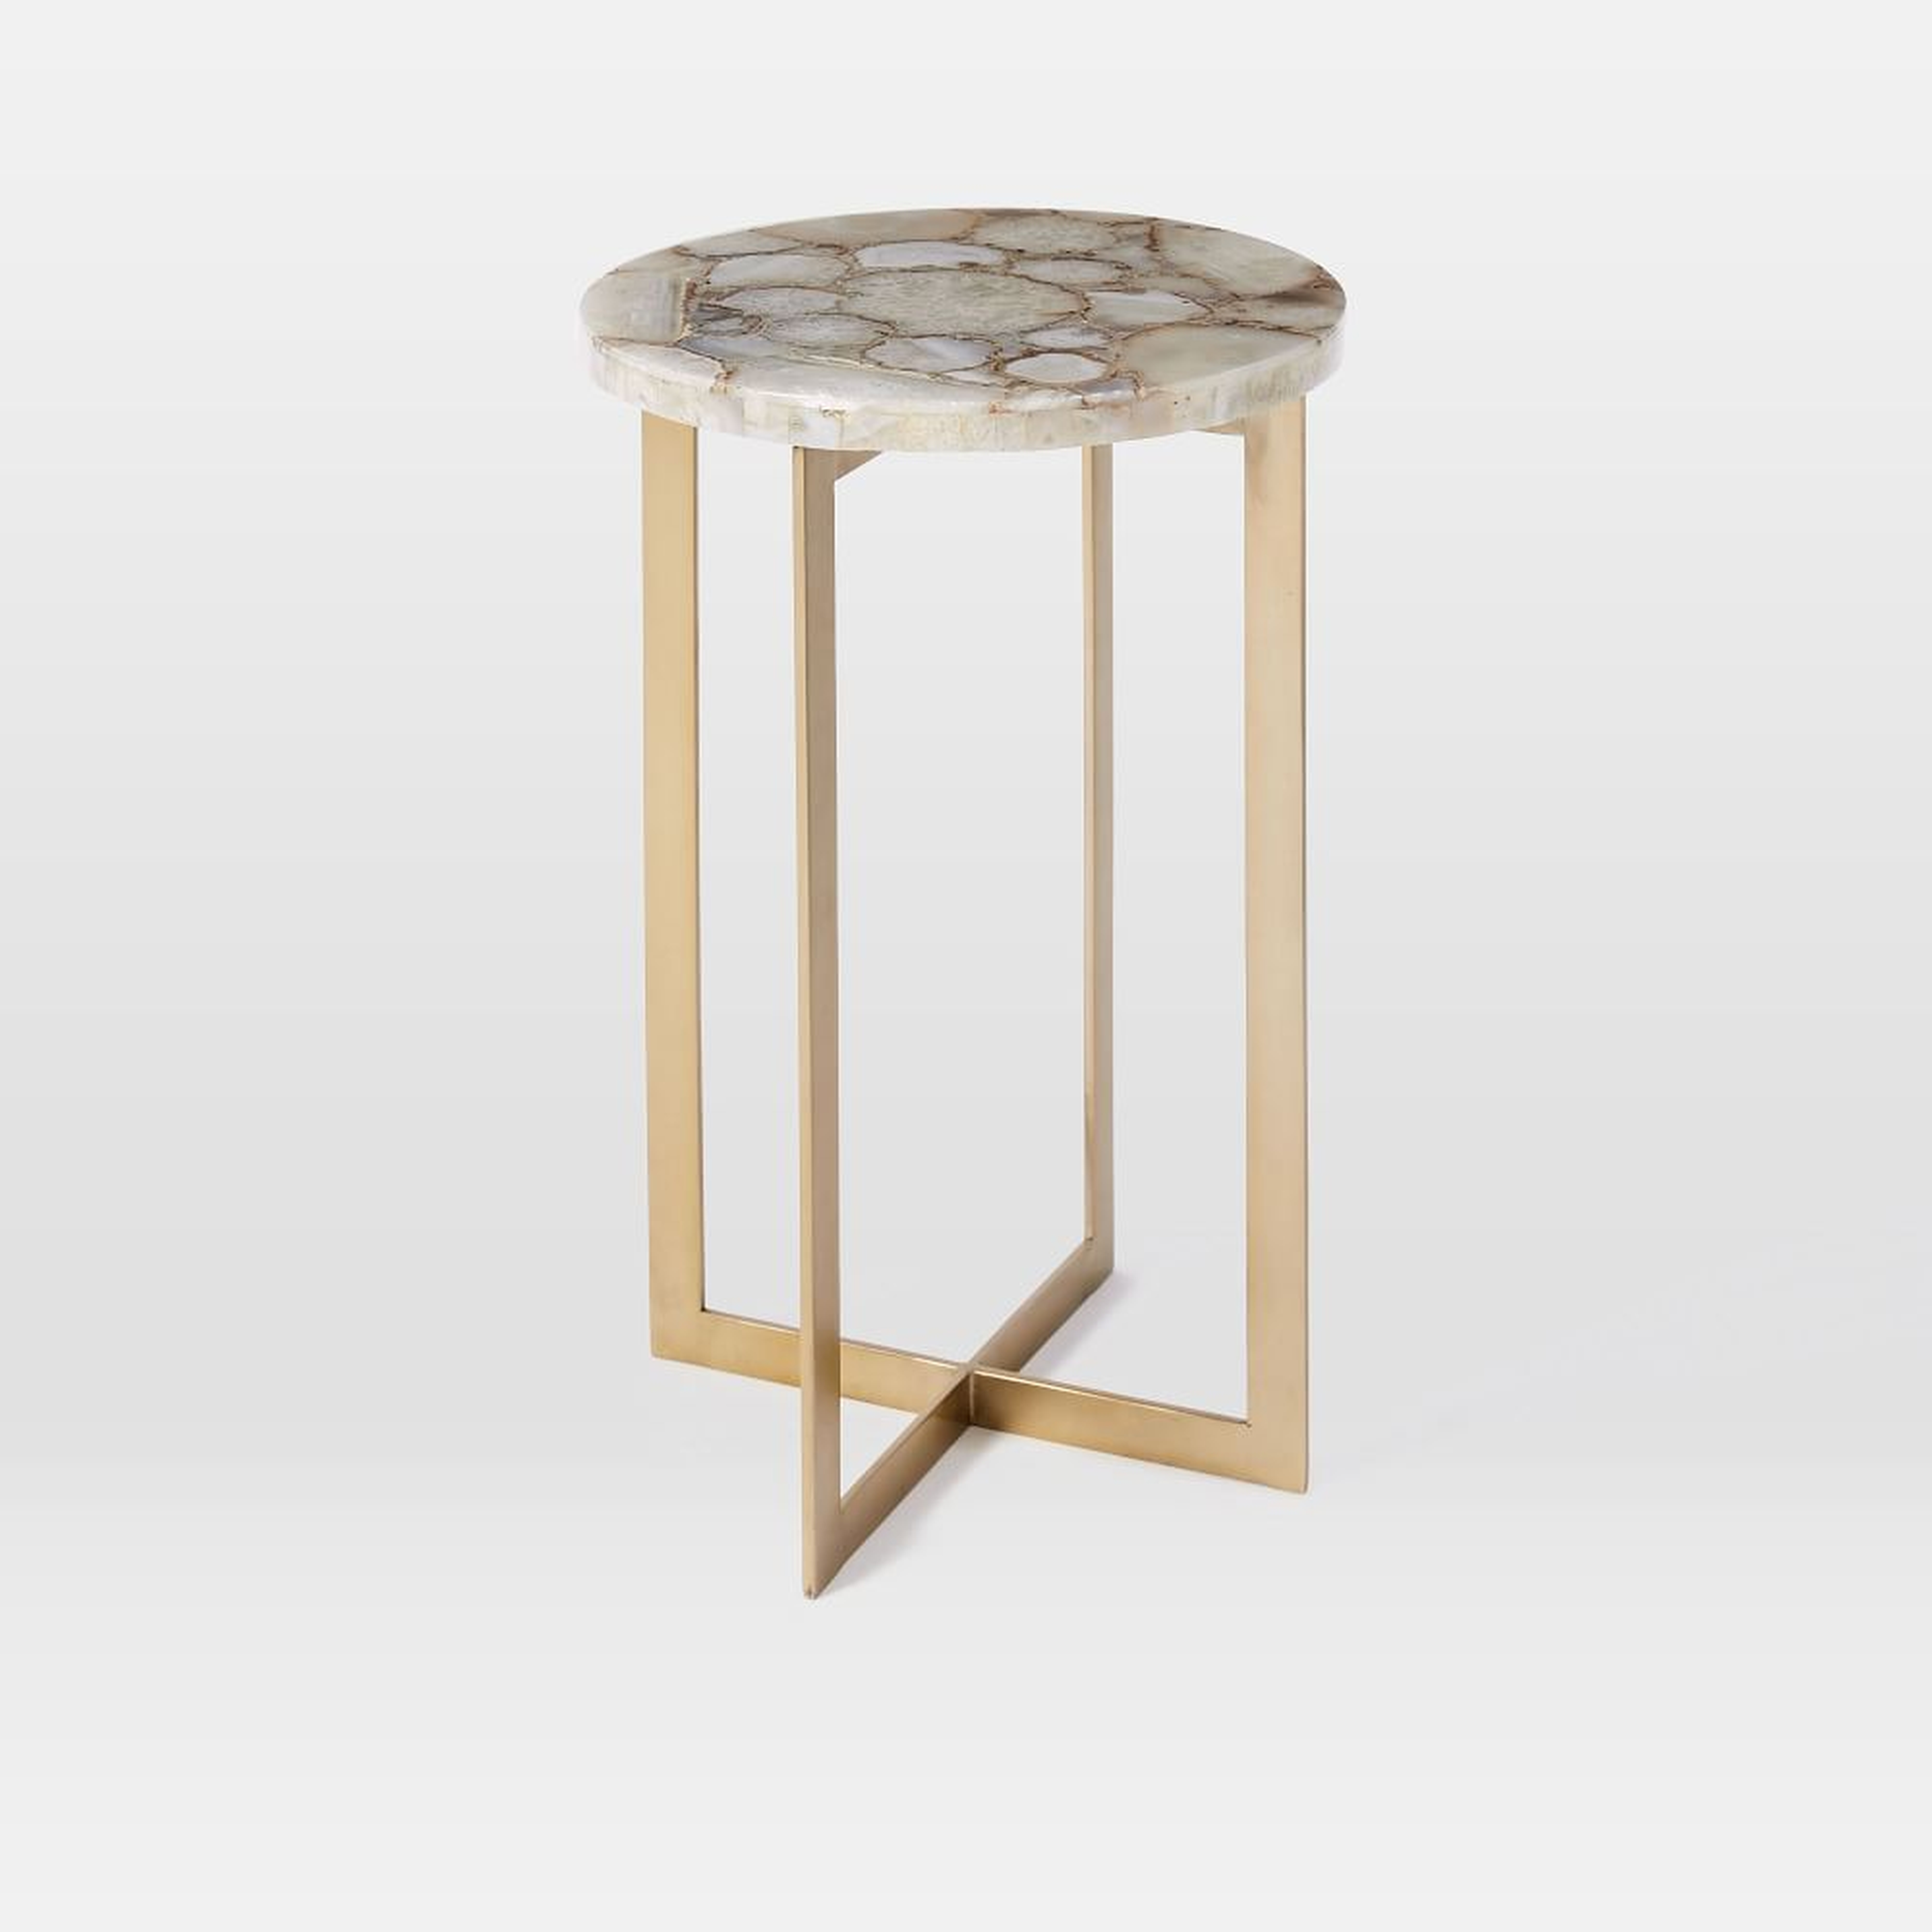 Agate Side Table, Neutral/Antique Brass - West Elm